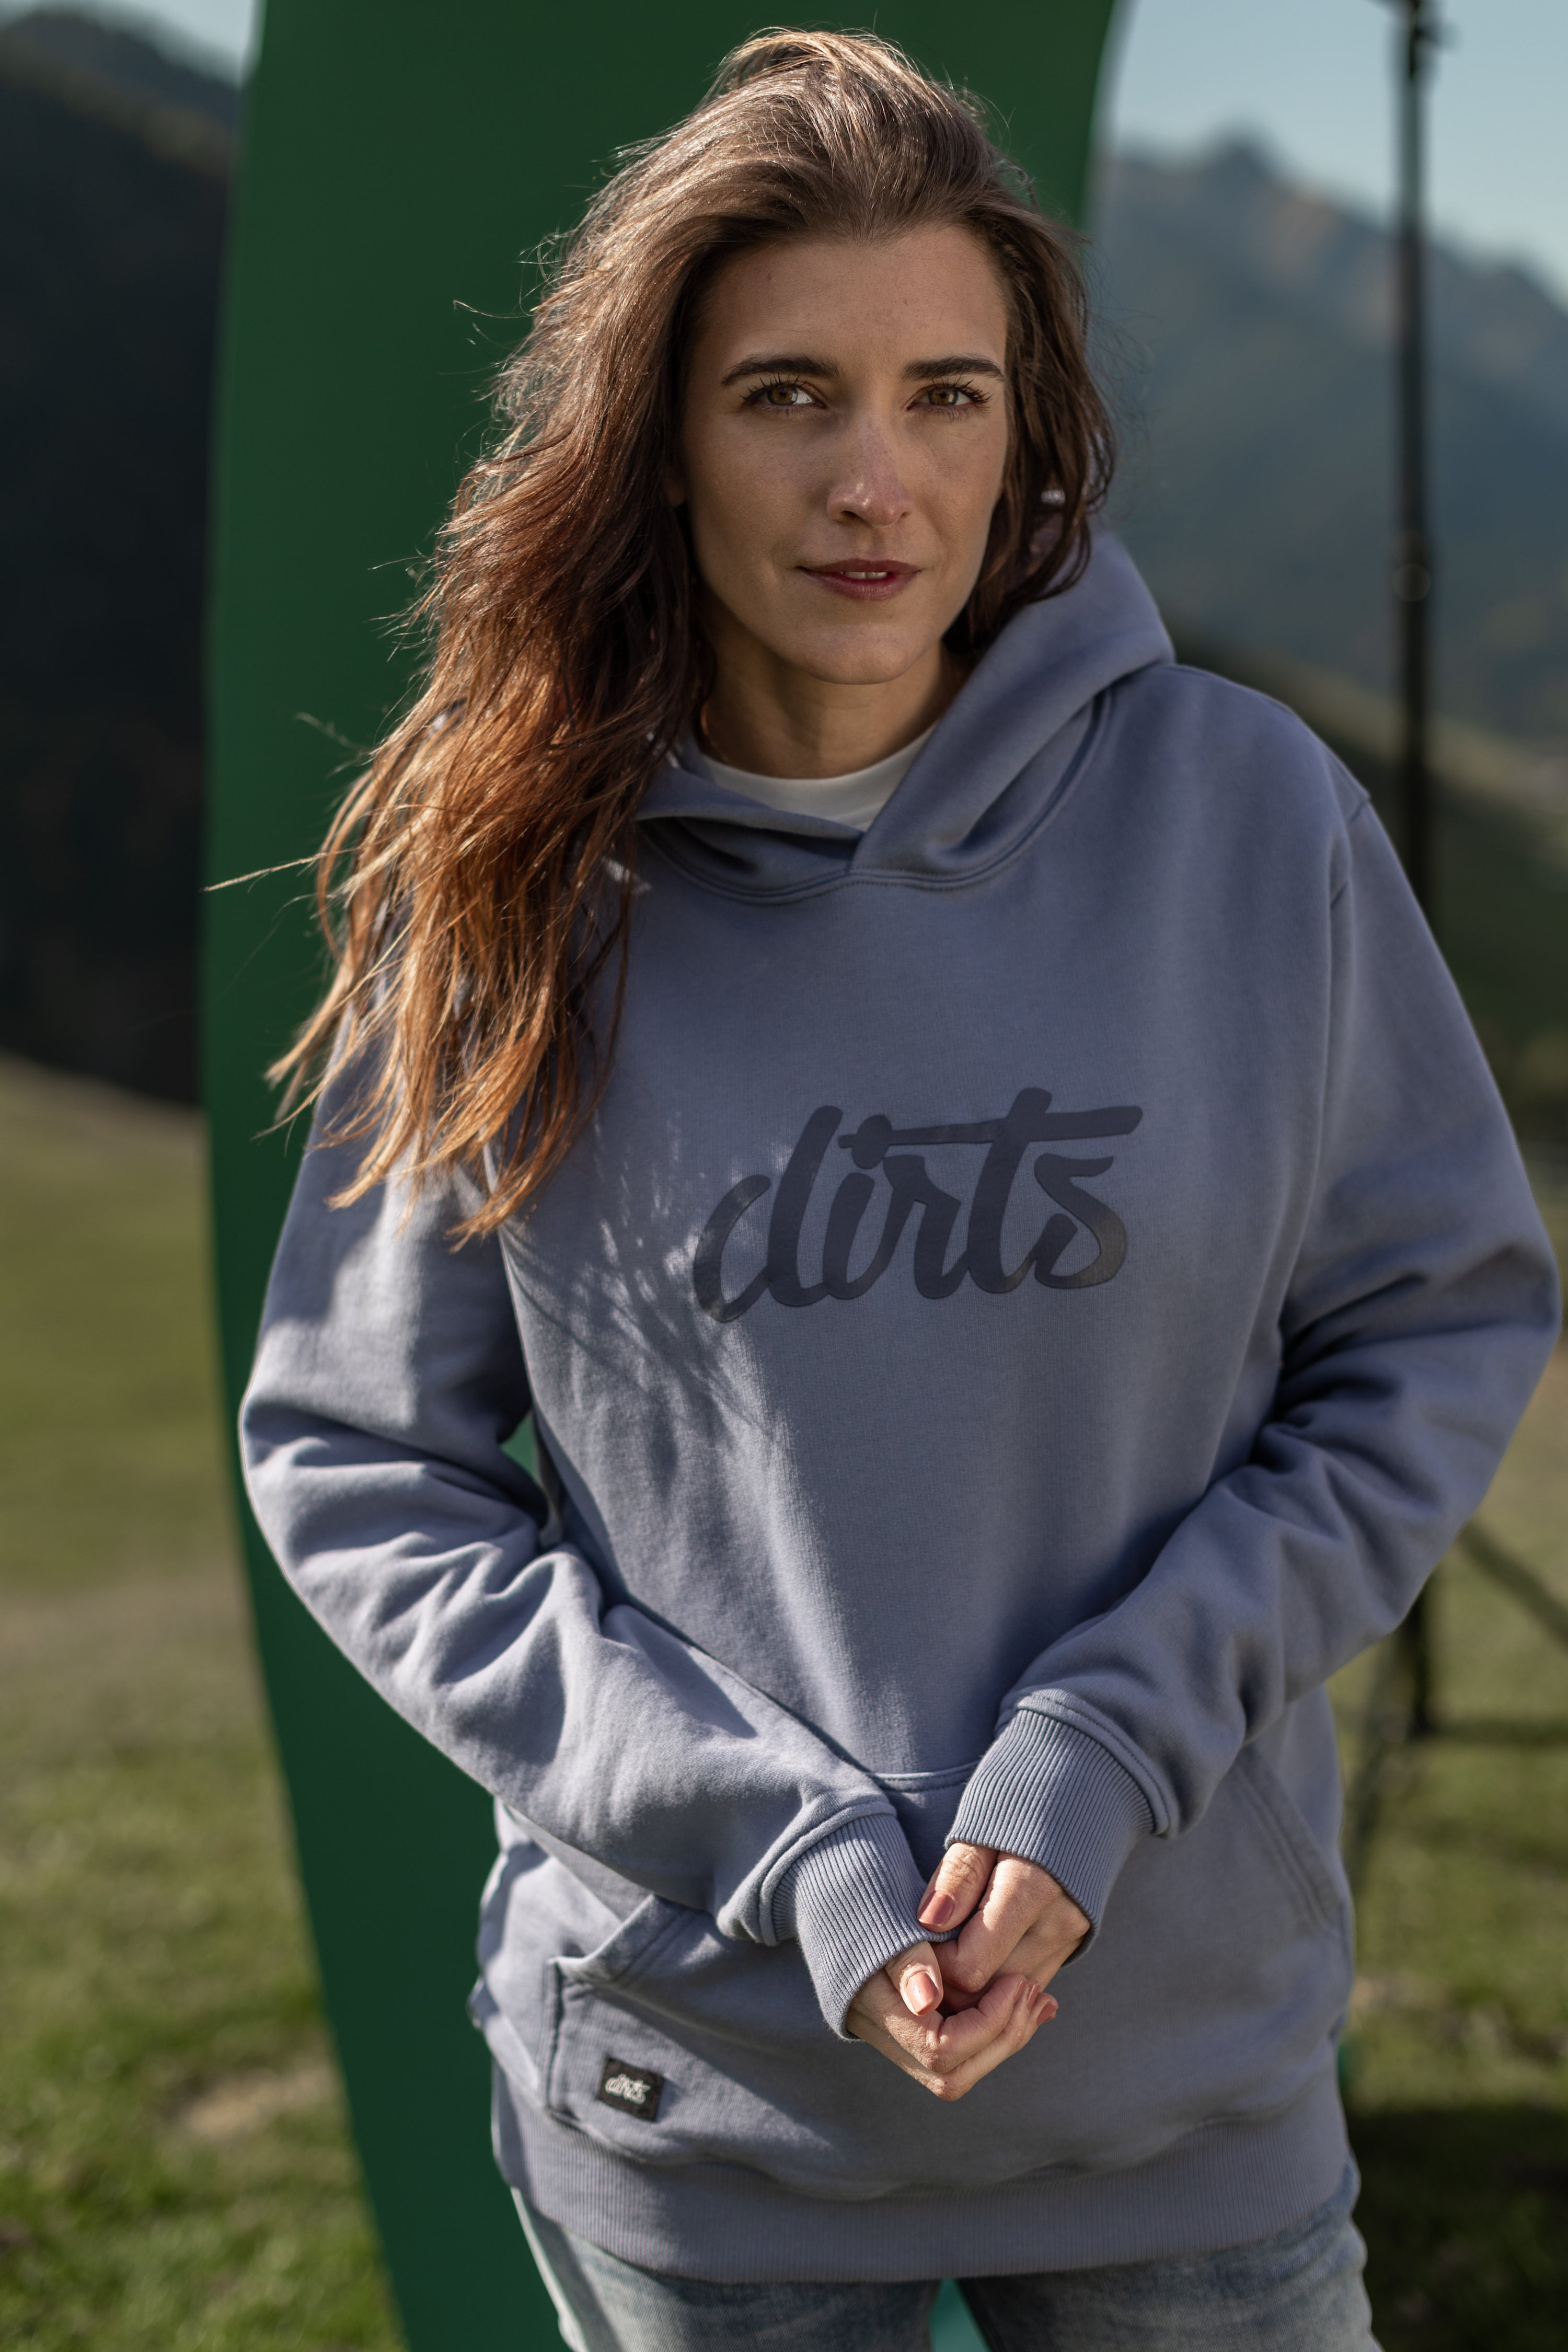 Blue hoodie Premium Logo made from 100% organic cotton from DIRTS